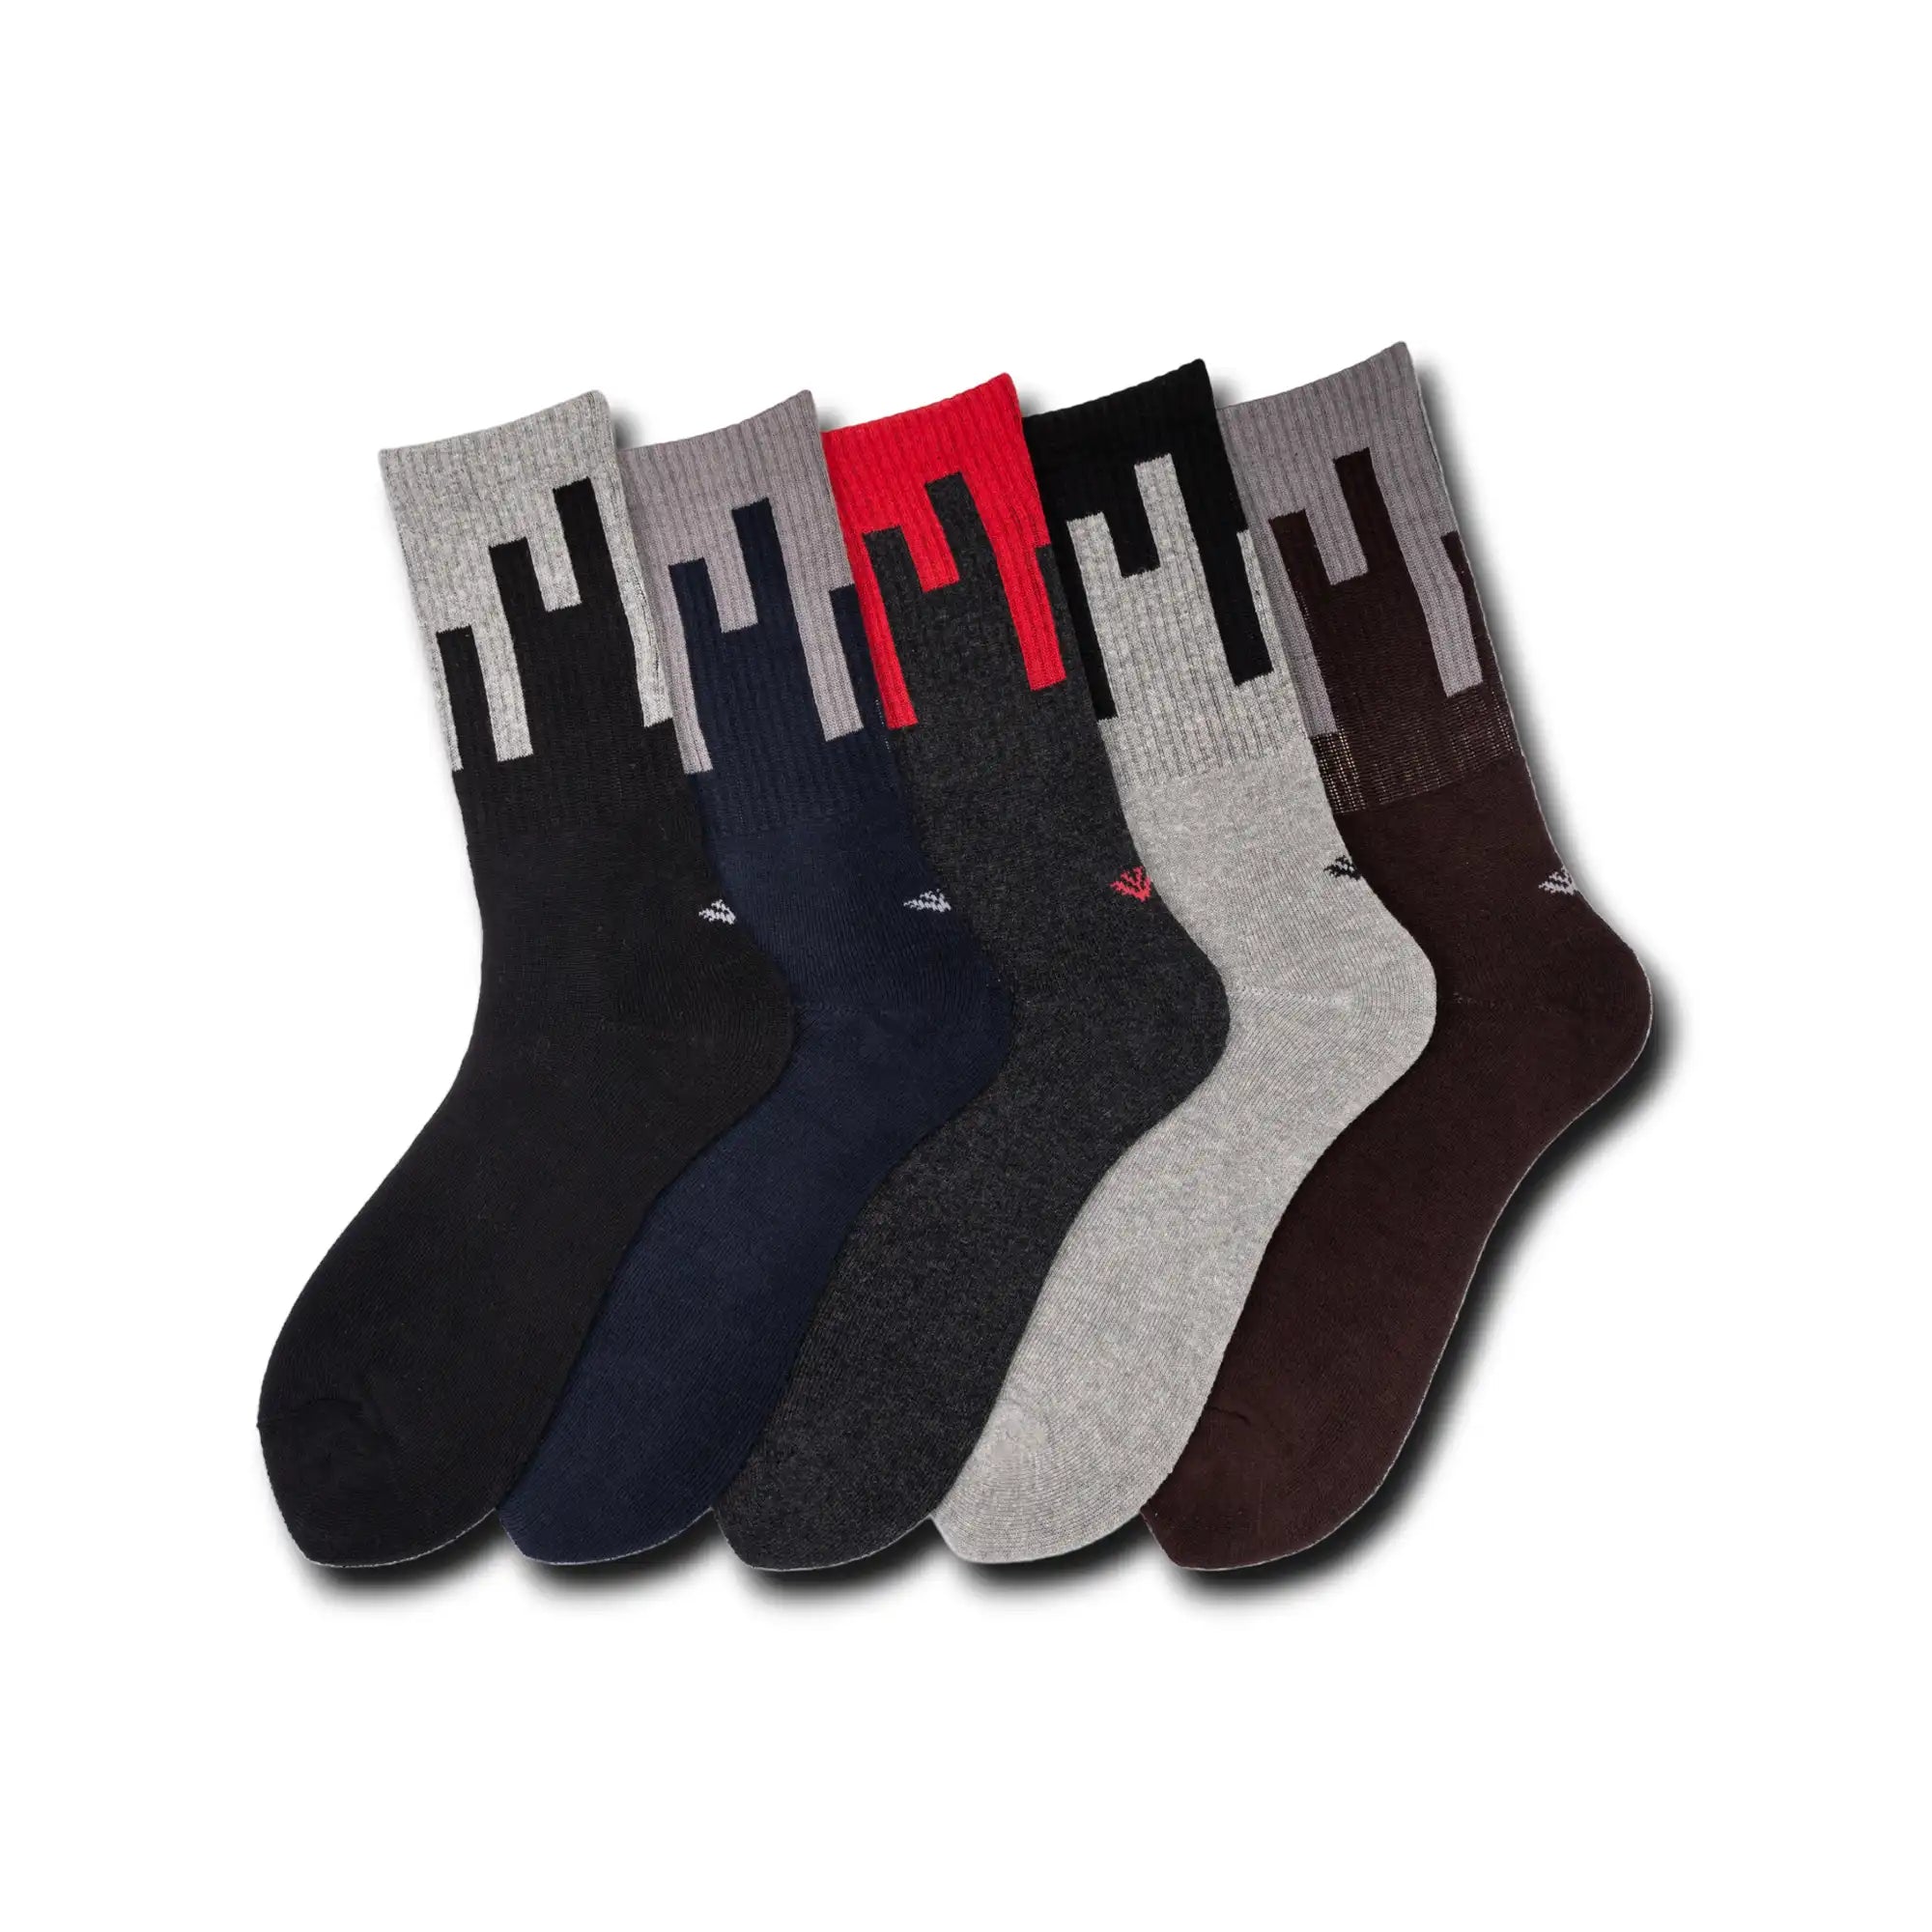 Young Wings Men's Multi Colour Cotton Fabric Design Full Length Socks - Pack of 3, Style no. M1-371 N